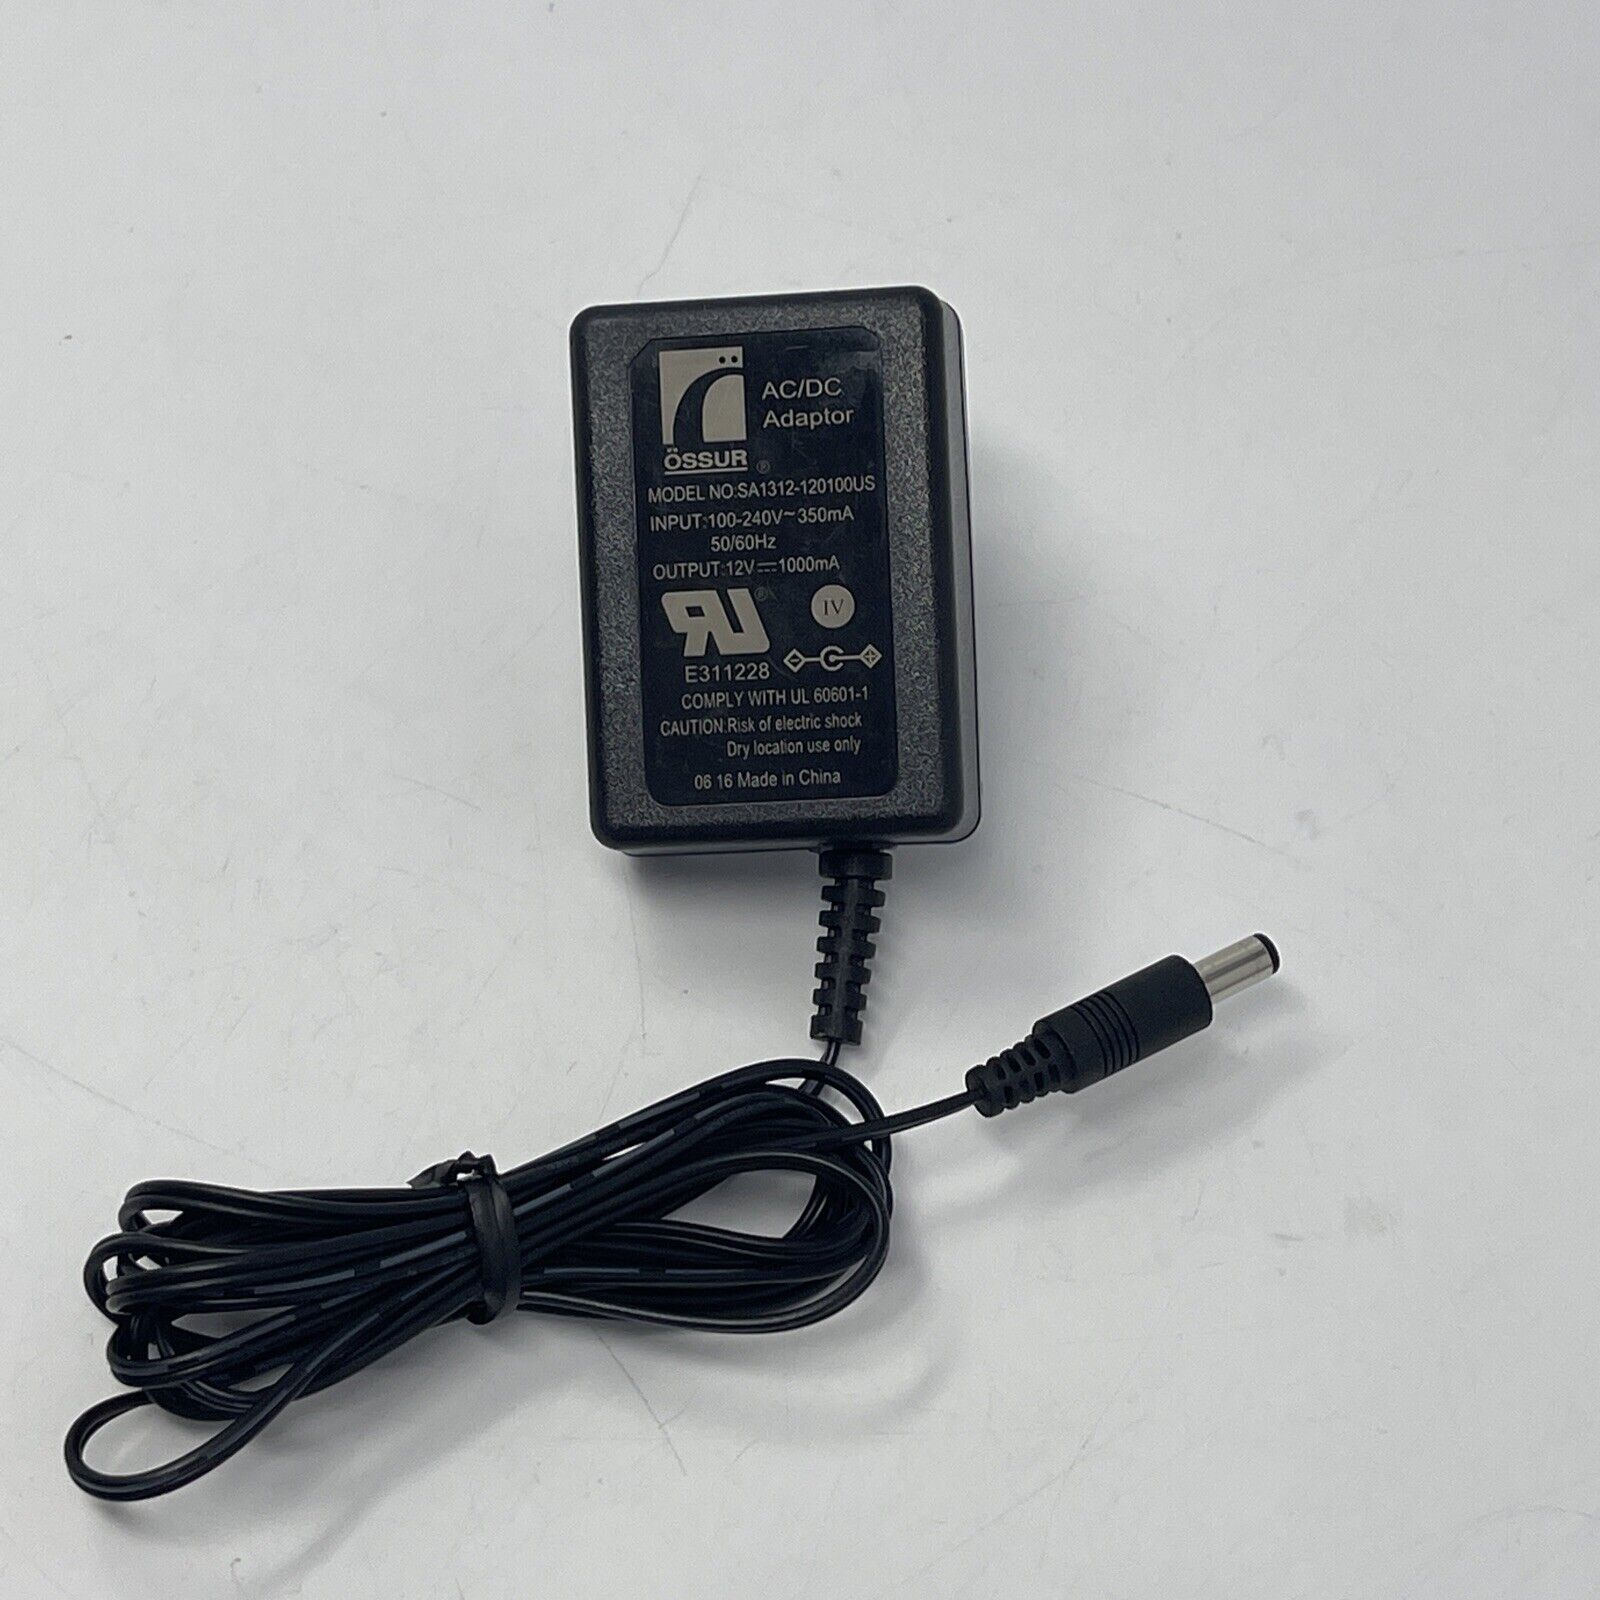 *Brand NEW*Ossur AC Adapter Power Supply SA1312-120100US 12V 1000mA Össur Charger Cable